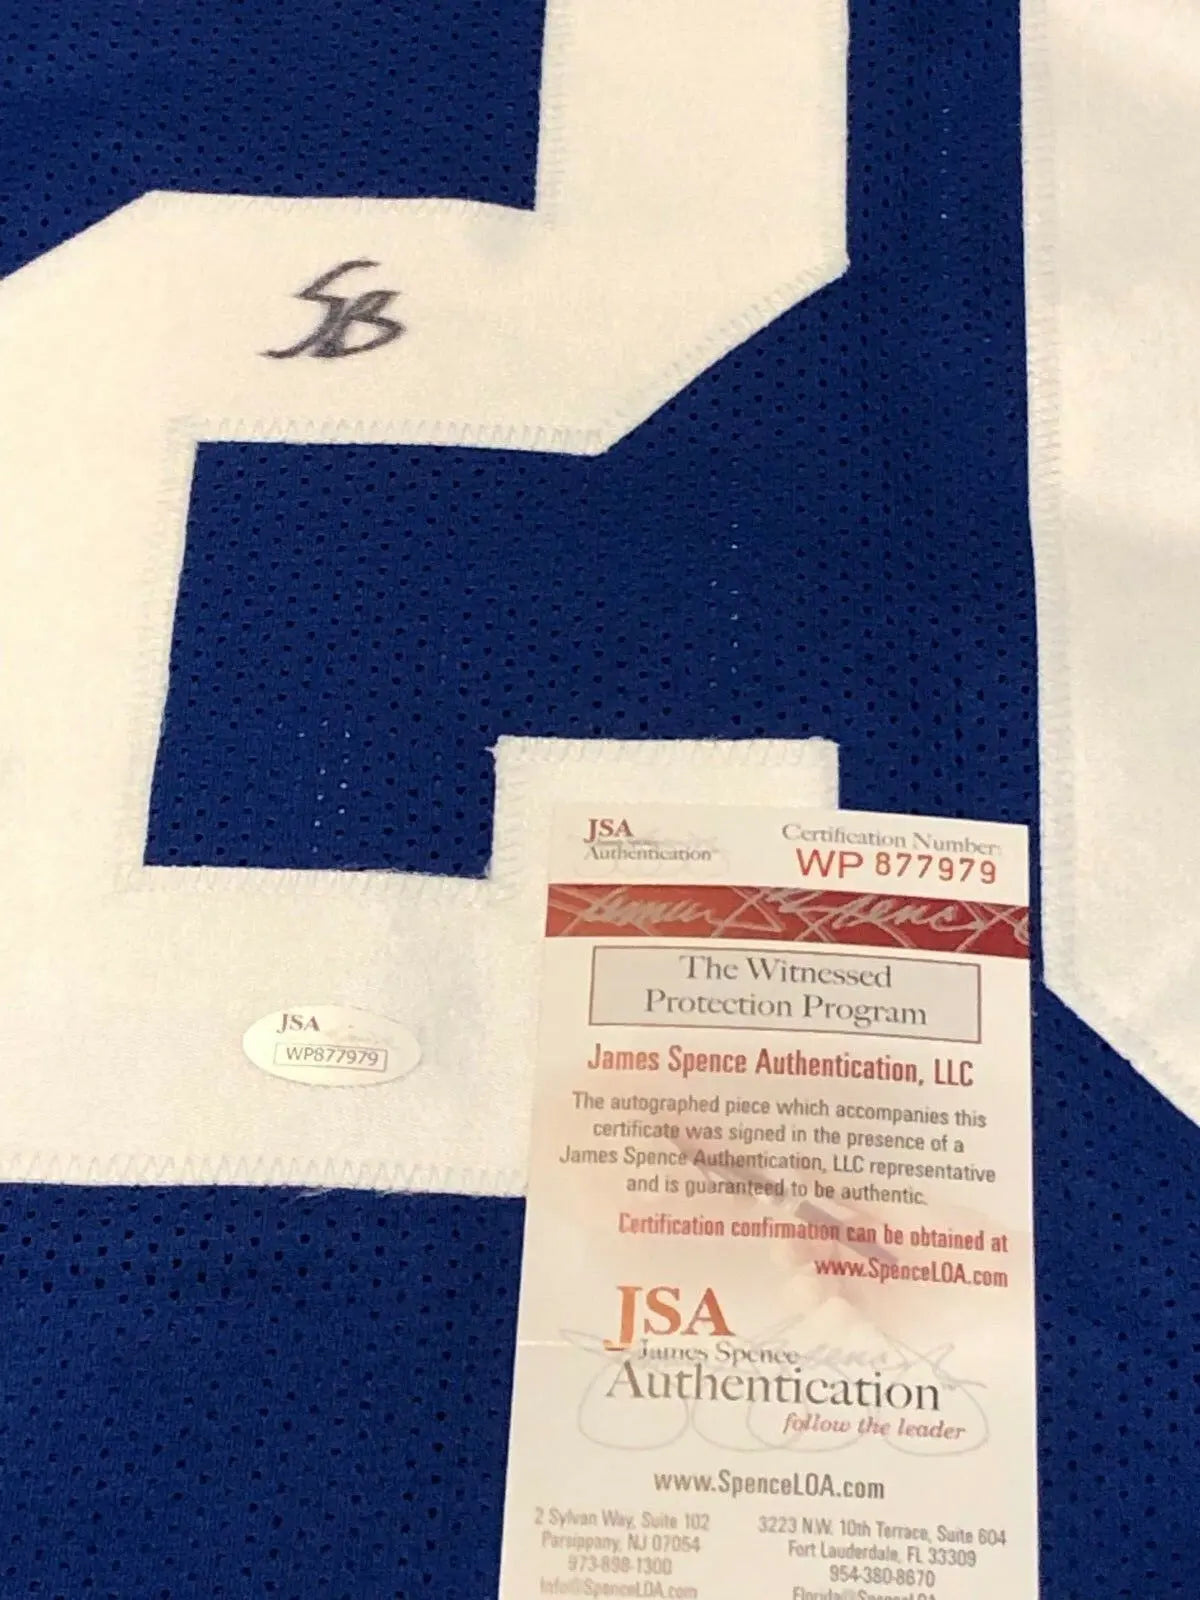 MVP Authentics N.Y. Giants Saquon Barkley Autographed Signed Jersey Jsa Coa 180 sports jersey framing , jersey framing